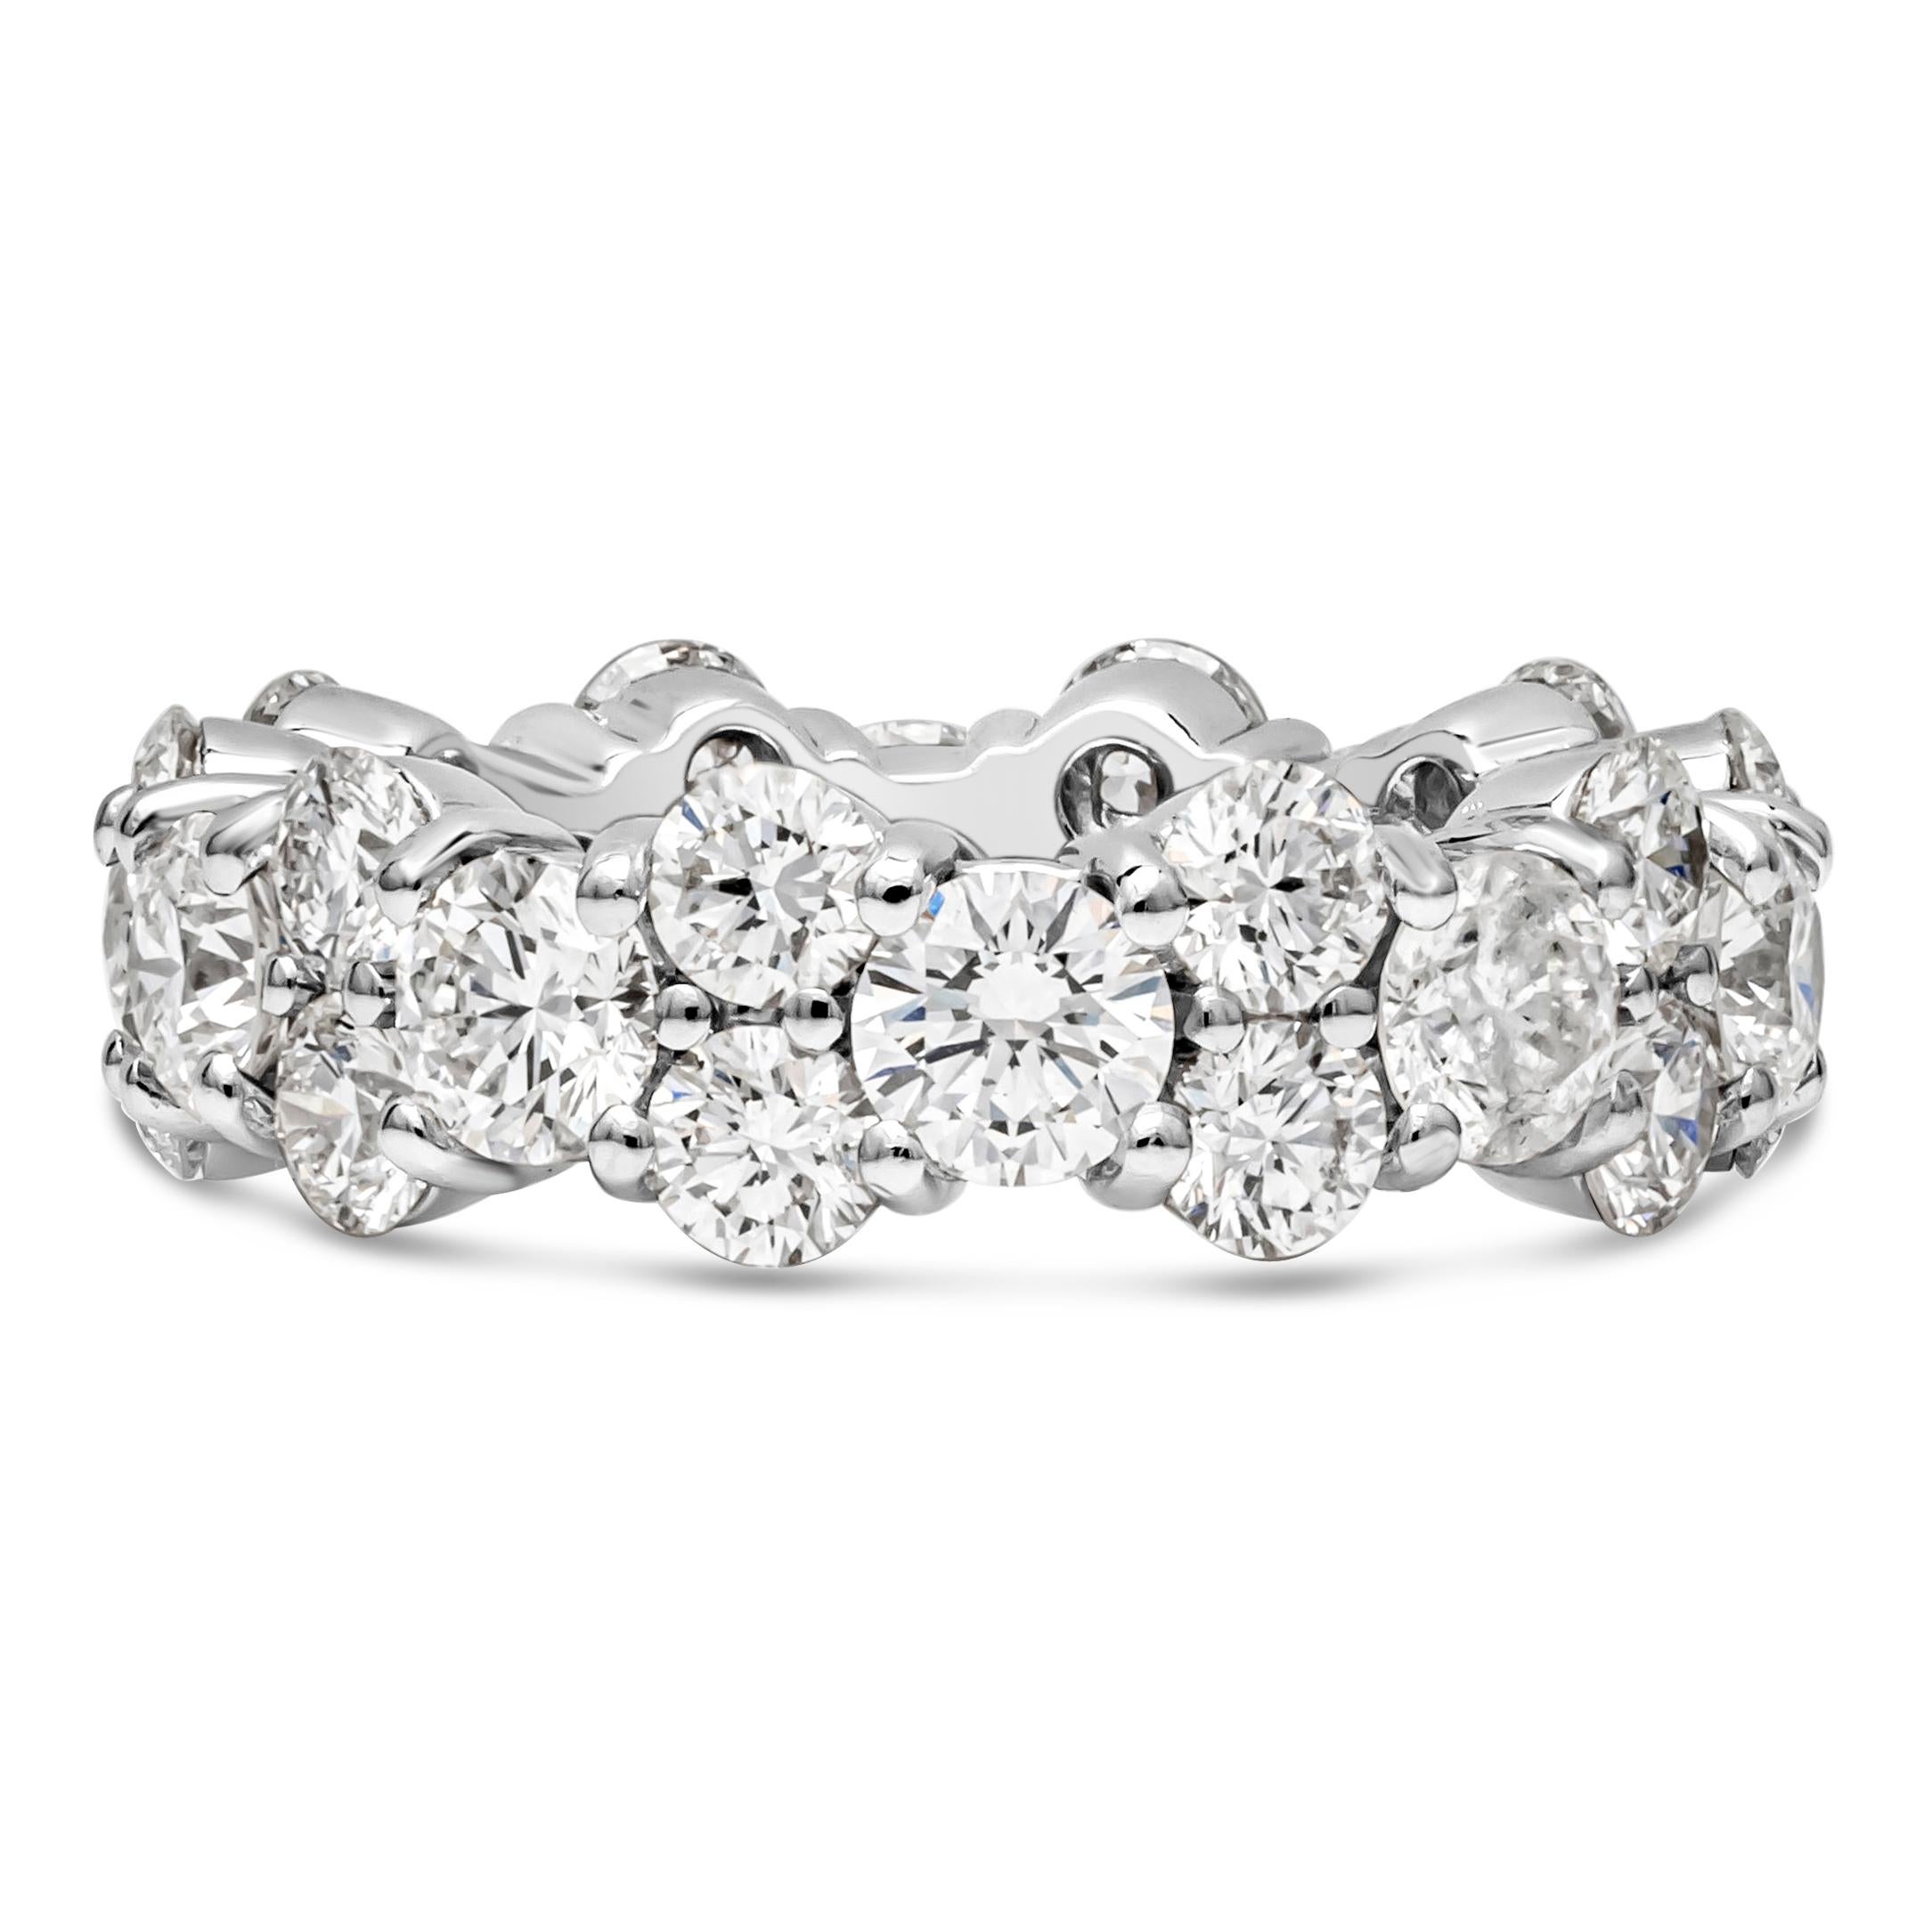 A chic and stylish eternity wedding band showcasing a row of 10 brilliant round cut diamonds weighing 3.05 carats total, that elegantly spaced by 20 smaller round melee diamonds weighing 3.10 carats total, F color and VS in clarity respectively. Set